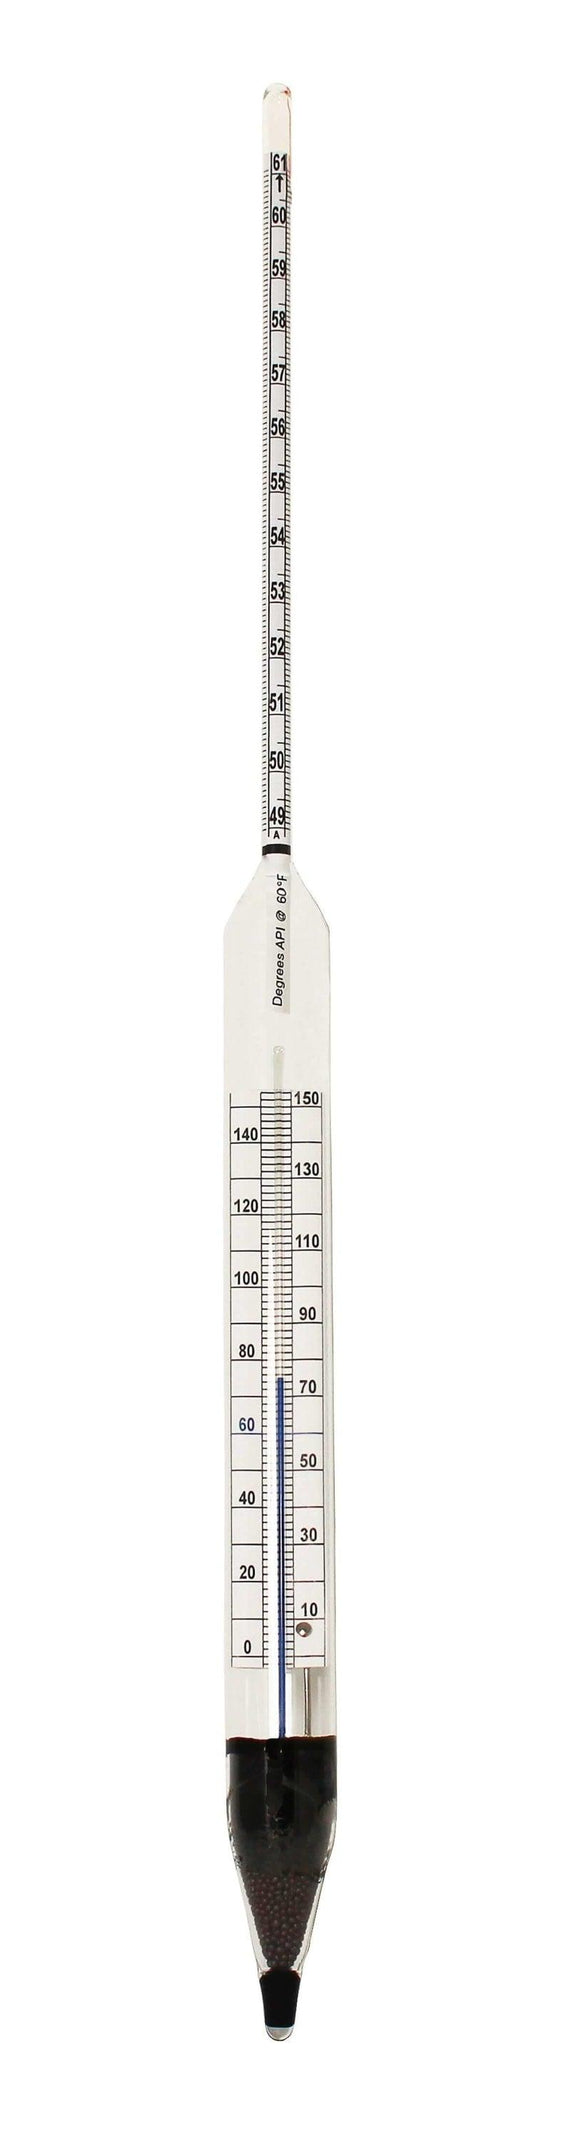 API ASTM Hydrometers with Thermometer from VEE GEE Scientific